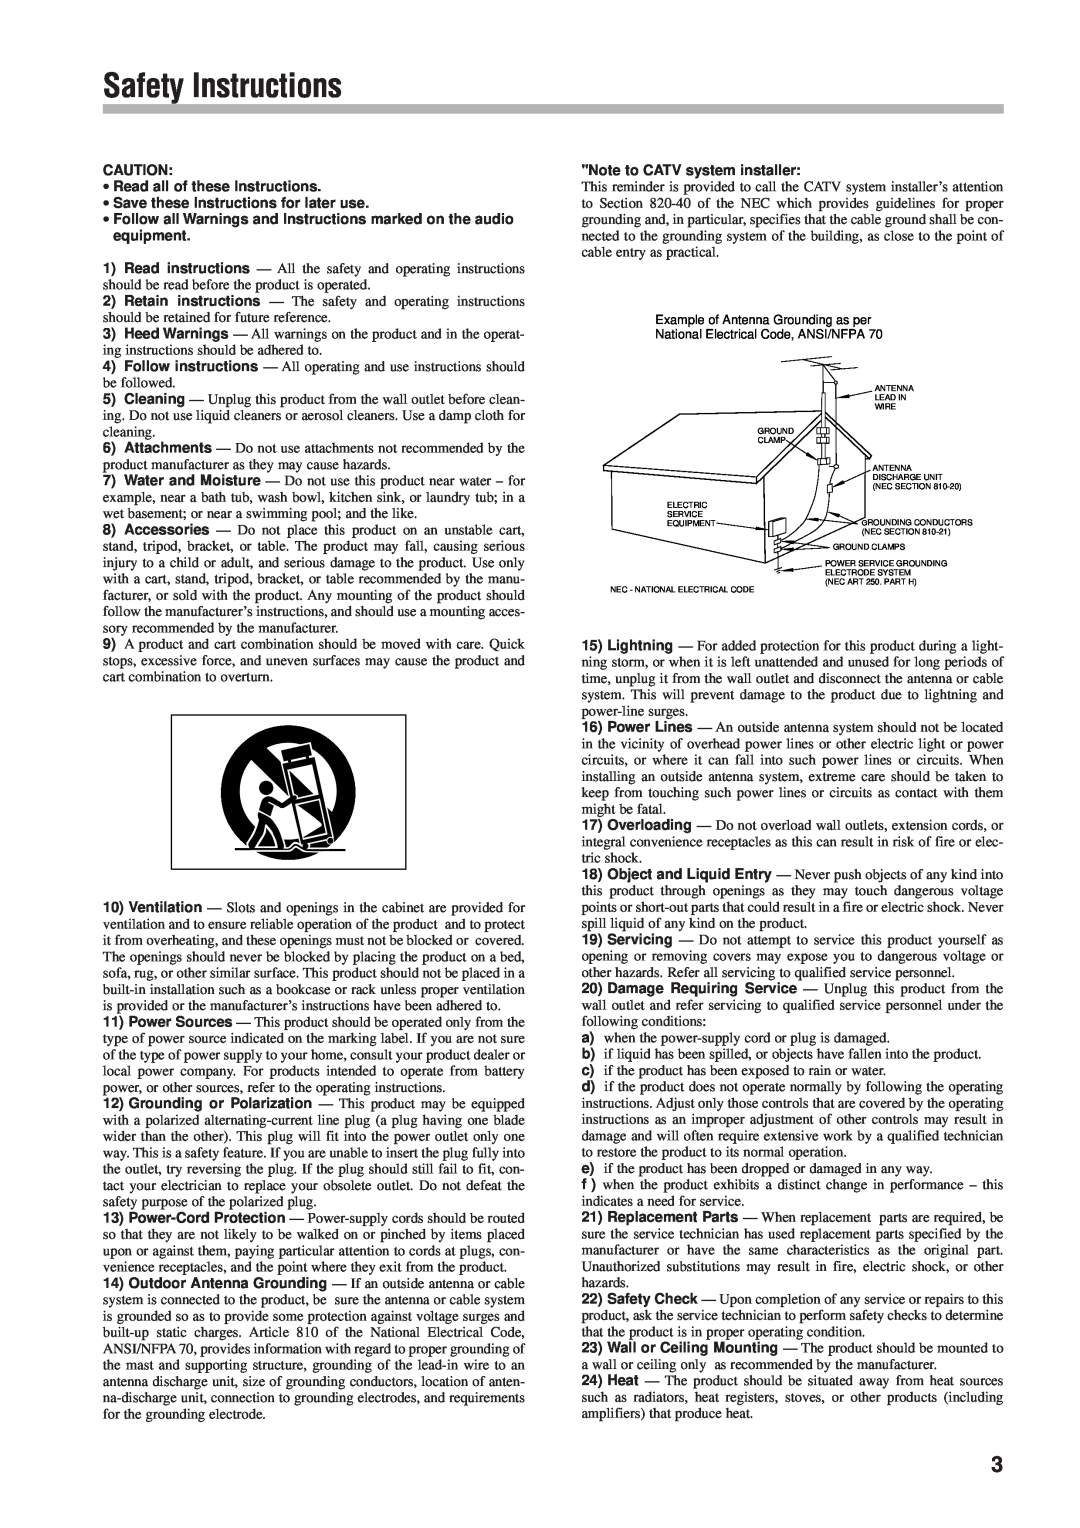 Tascam DA-302 owner manual Safety Instructions, Read all of these Instructions, Save these Instructions for later use 